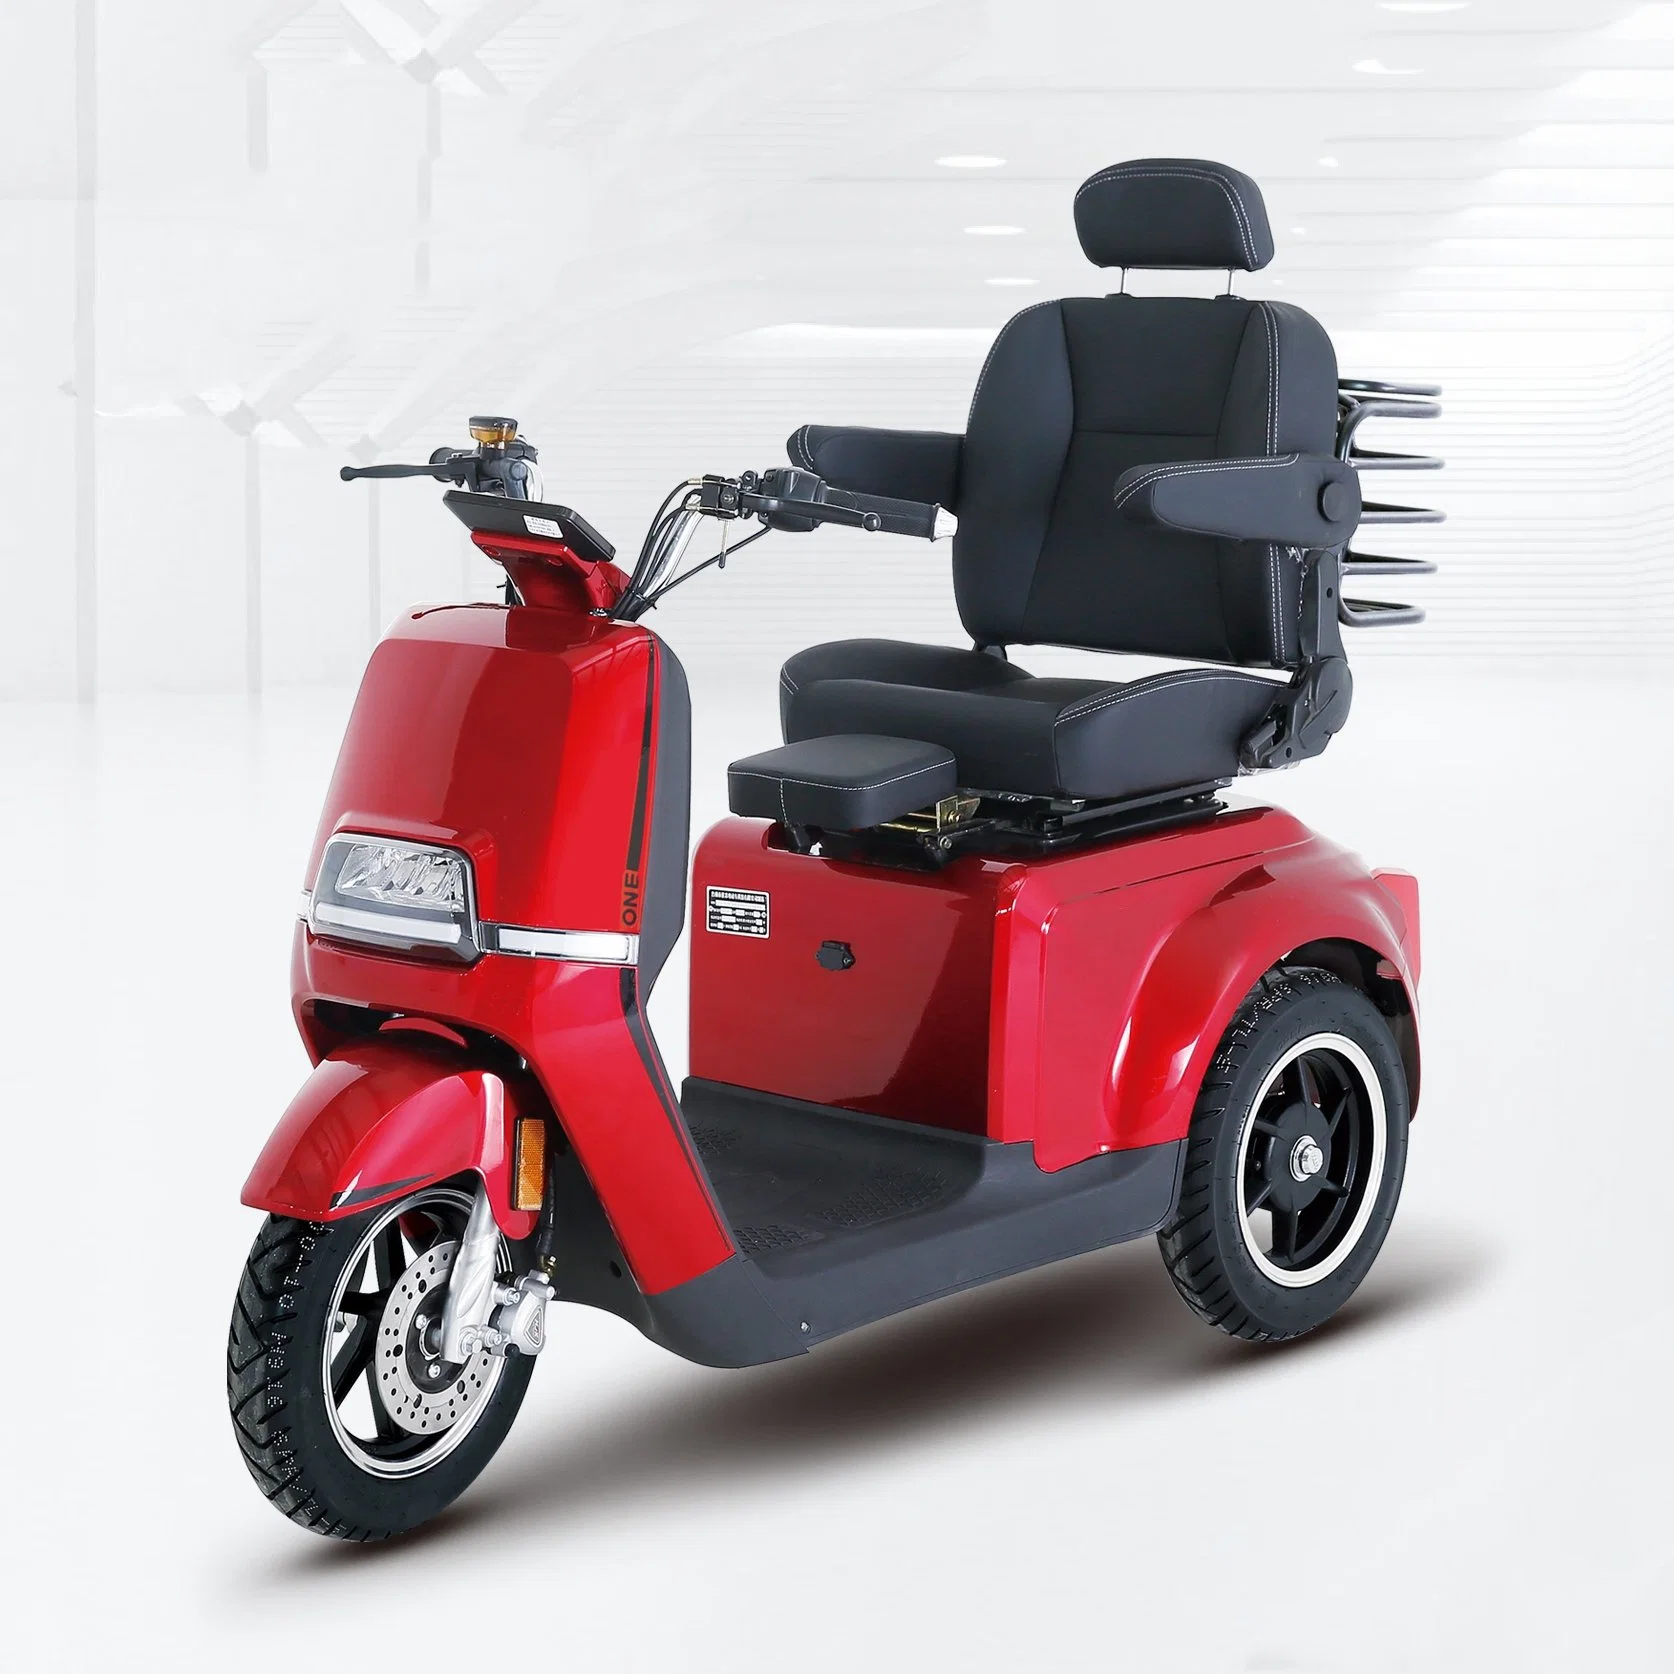 Three Wheels Cargo Electric Tricycle Motorcycle/Electric Scooter/Body Passengers Tricycle for Adult